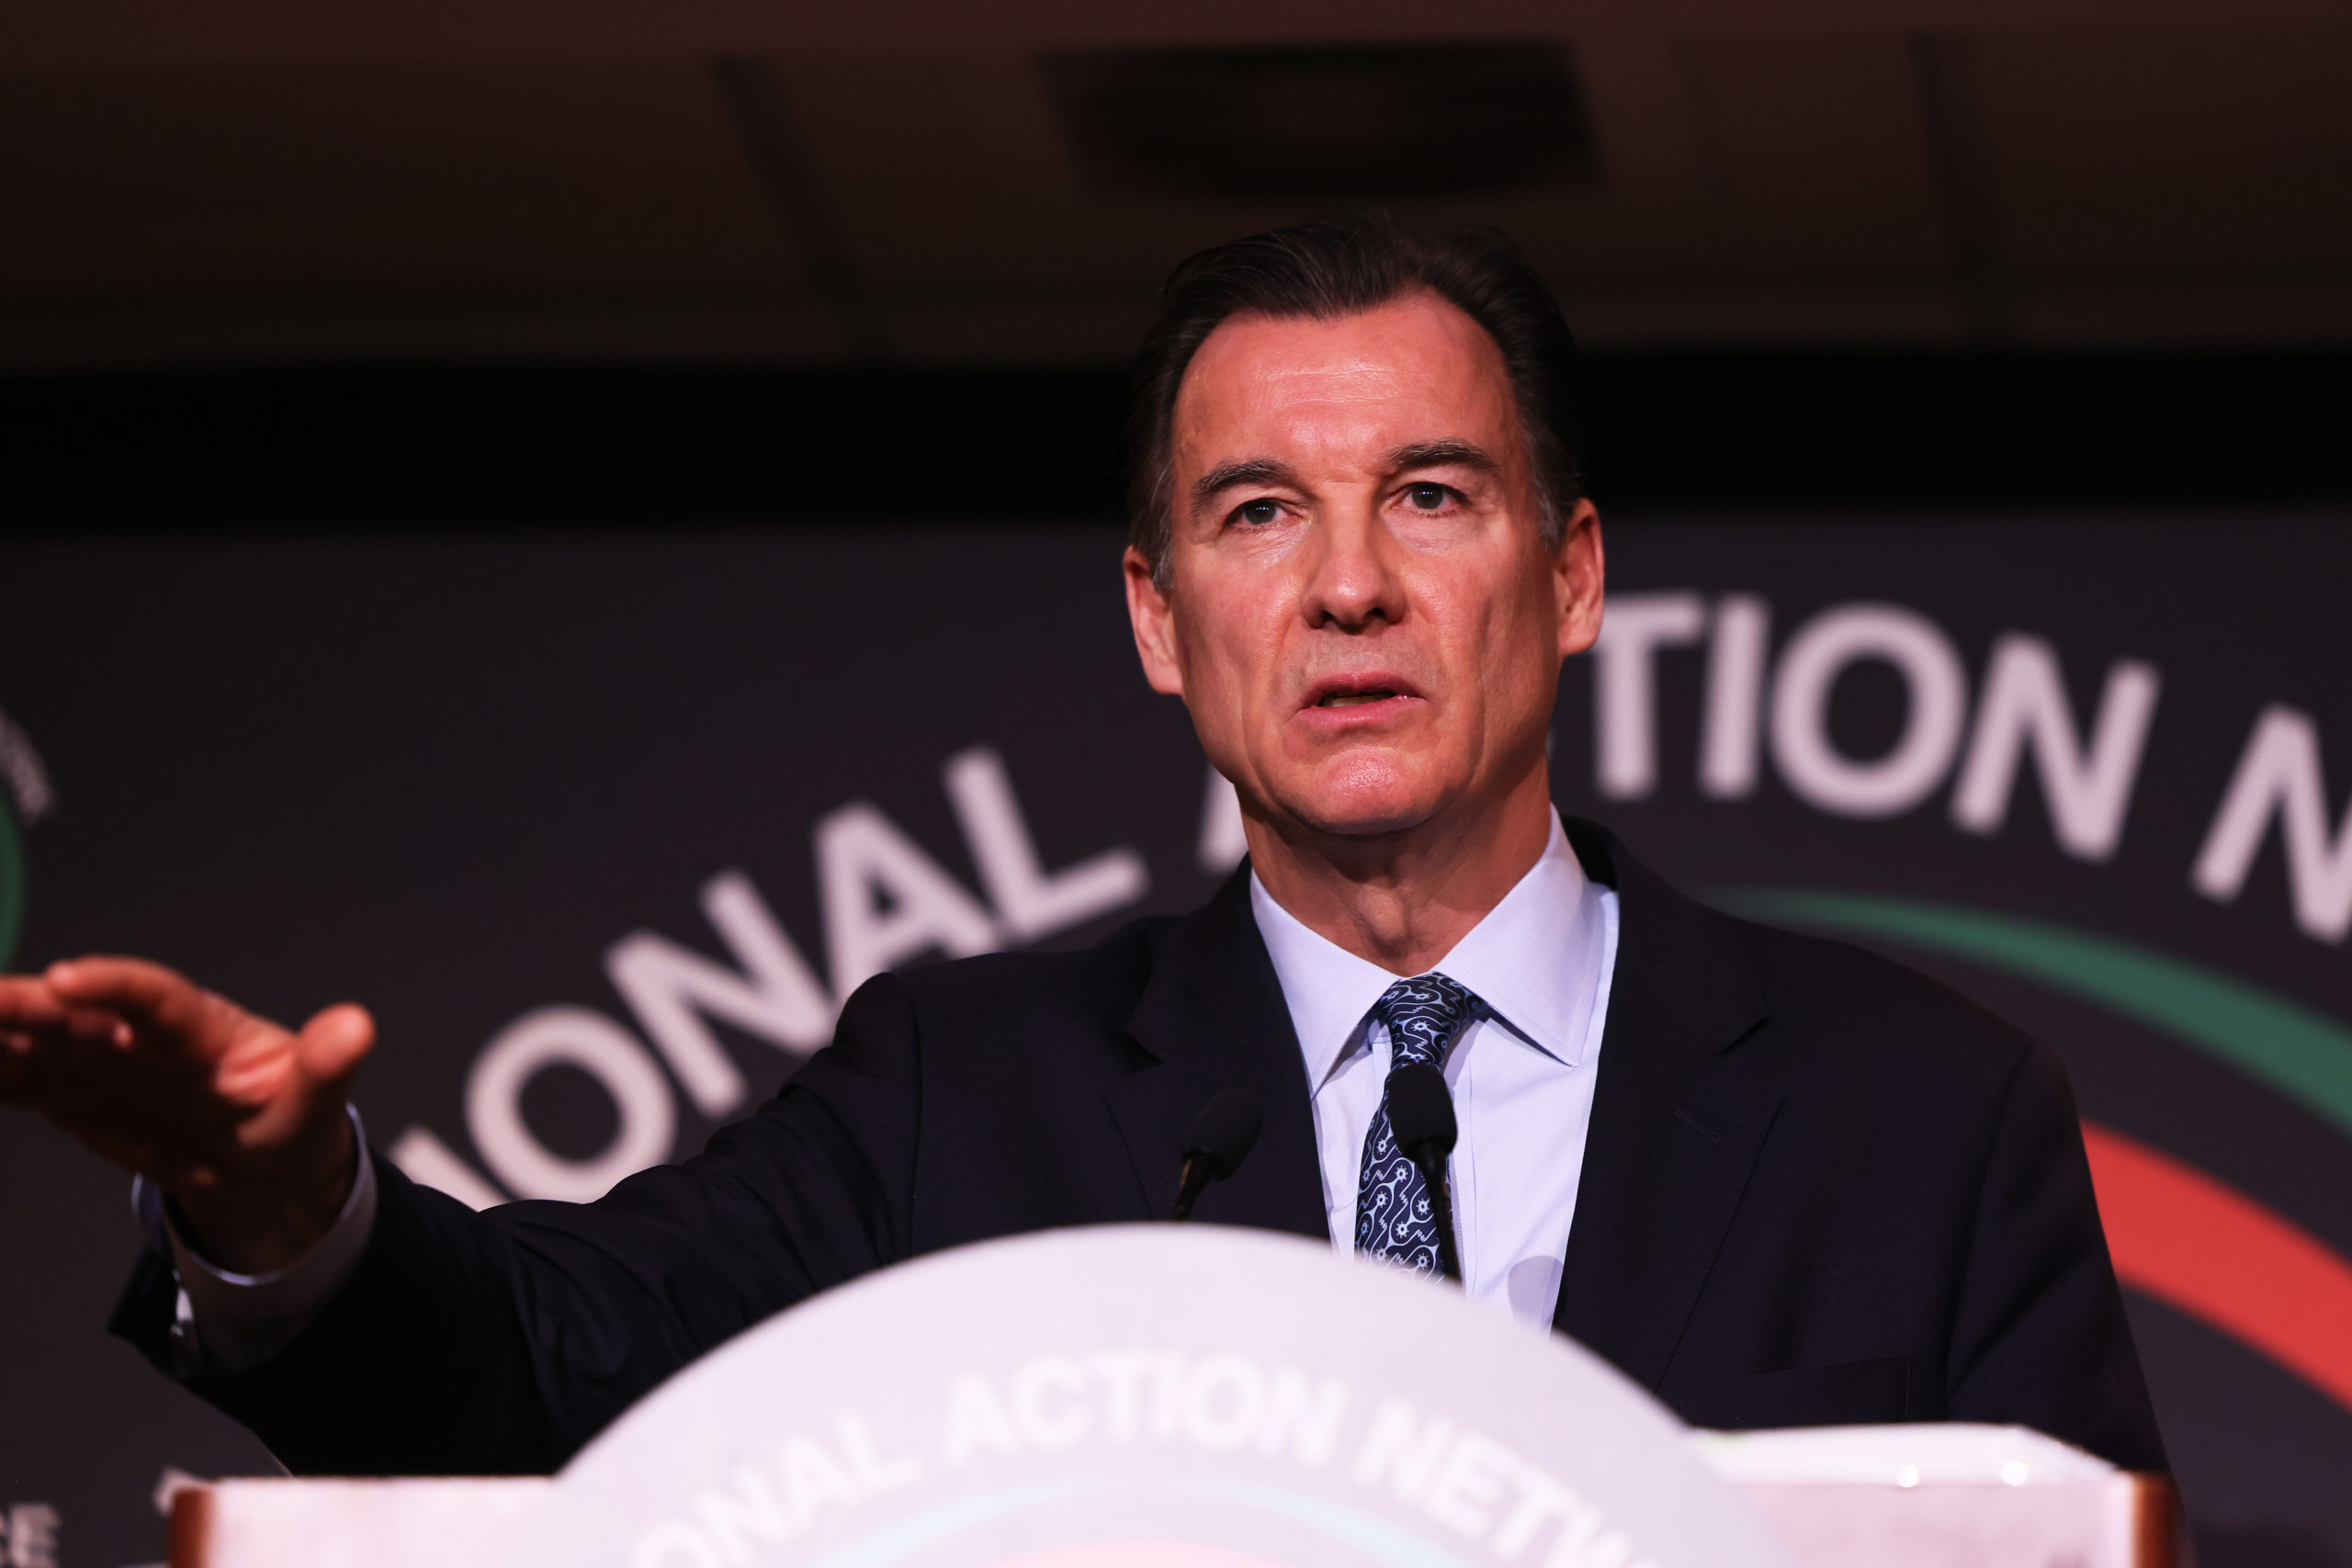 NEW YORK, NEW YORK - APRIL 06: Rep. Tom Suozzi and New York State Governor candidate, speaks during the 2022 National Action Network's Annual Convention at the Times Square Sheraton hotel on April 06, 2022 in New York City. Rev. Al Sharpton and his National Action Network held its first annual in person conference in two years due to the coronavirus (COVID-19) pandemic. The conference brings together civil rights leaders and allies, government officials, and other leaders from around the country to discuss voting rights, police reform and public safety. (Photo by Michael M. Santiago/Getty Images)